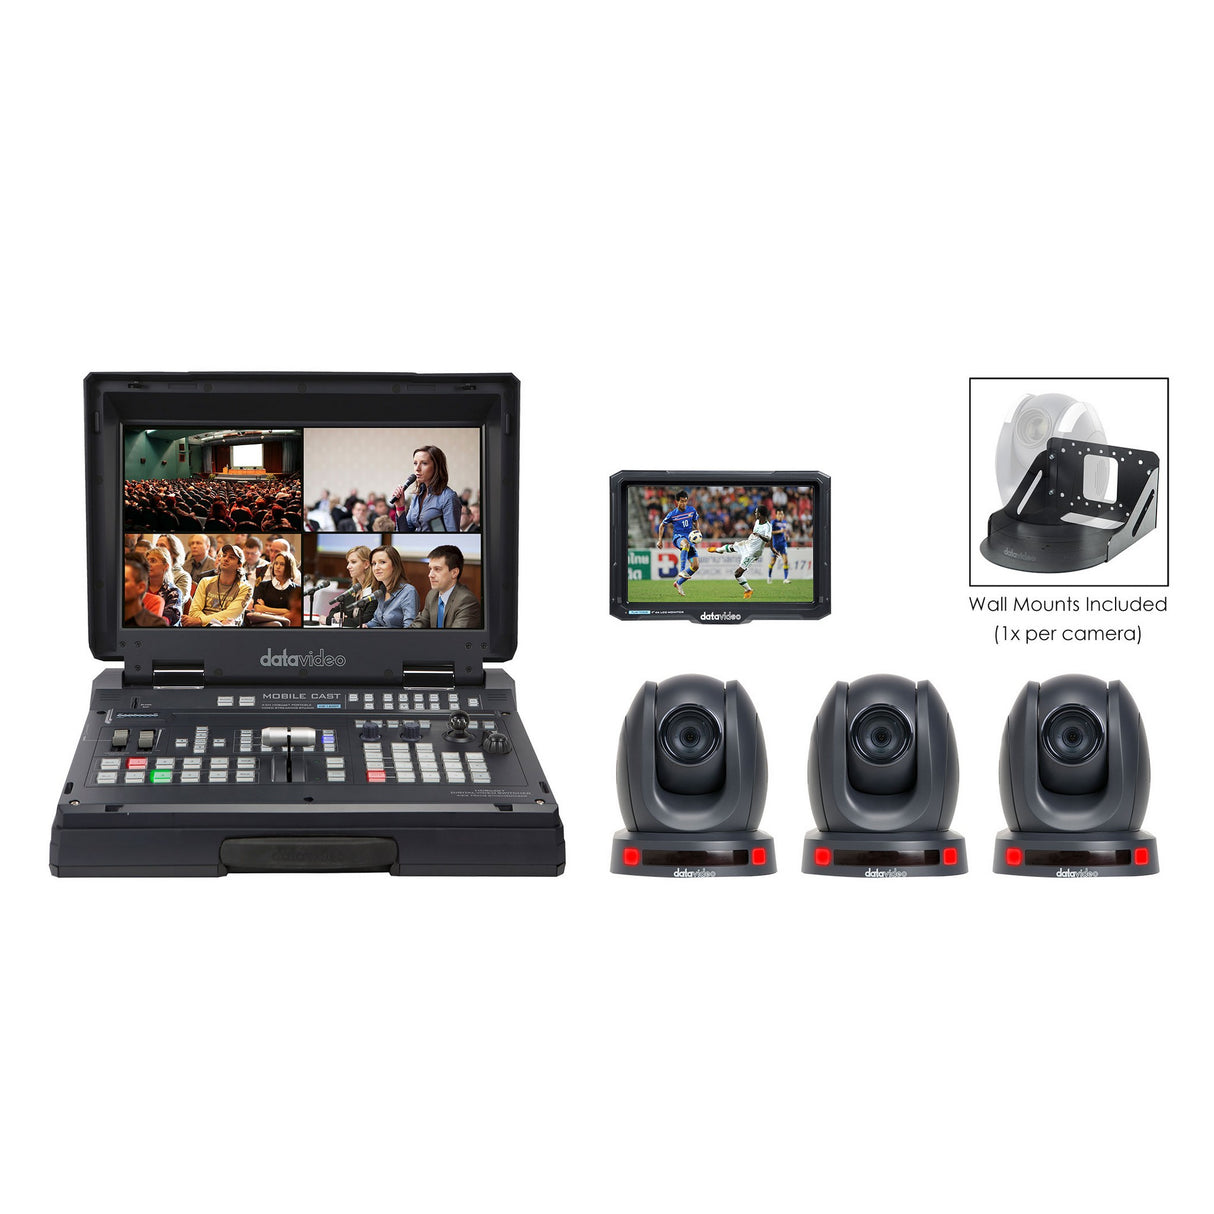 Datavideo HS-1600T-3C140TM Portable HD Web Production Studio with 3x HDBaseT Cameras and Monitor